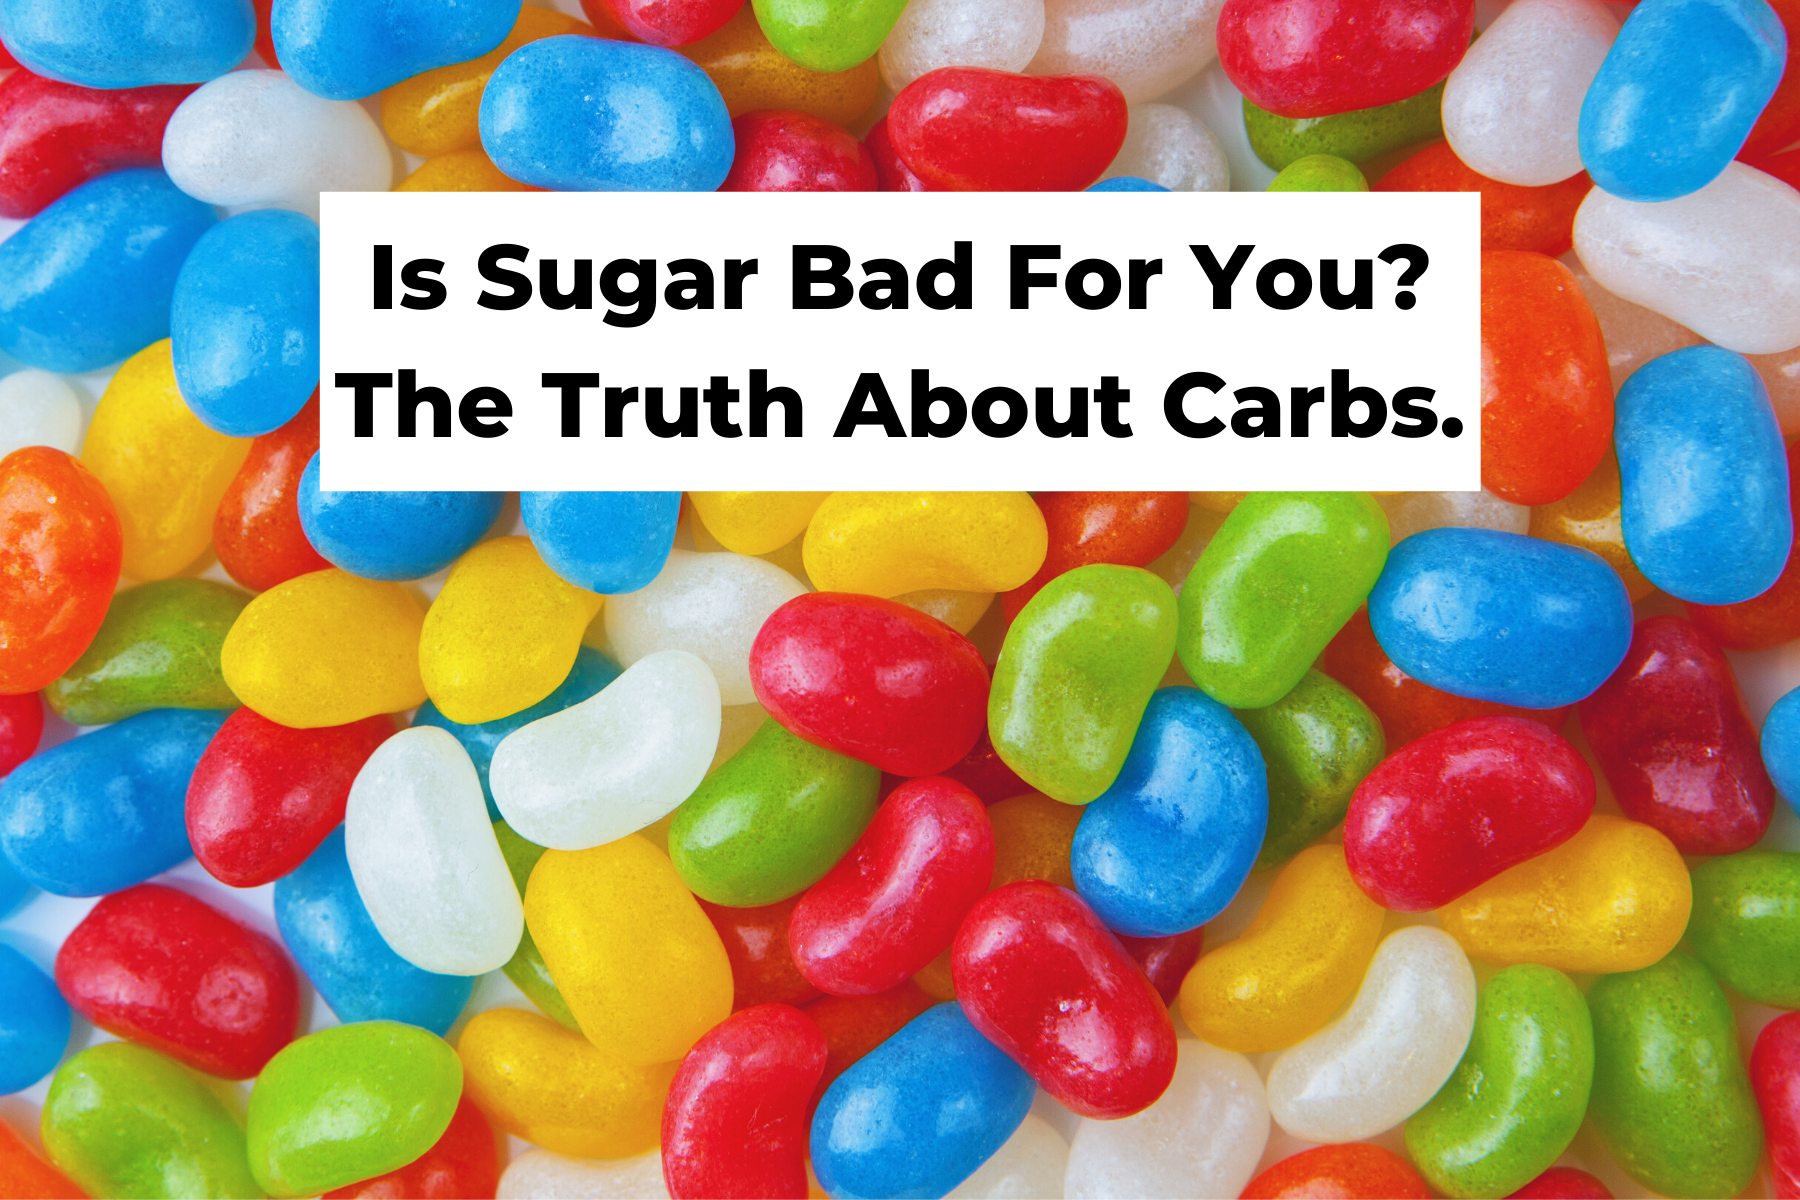 Is Sugar Bad For You?